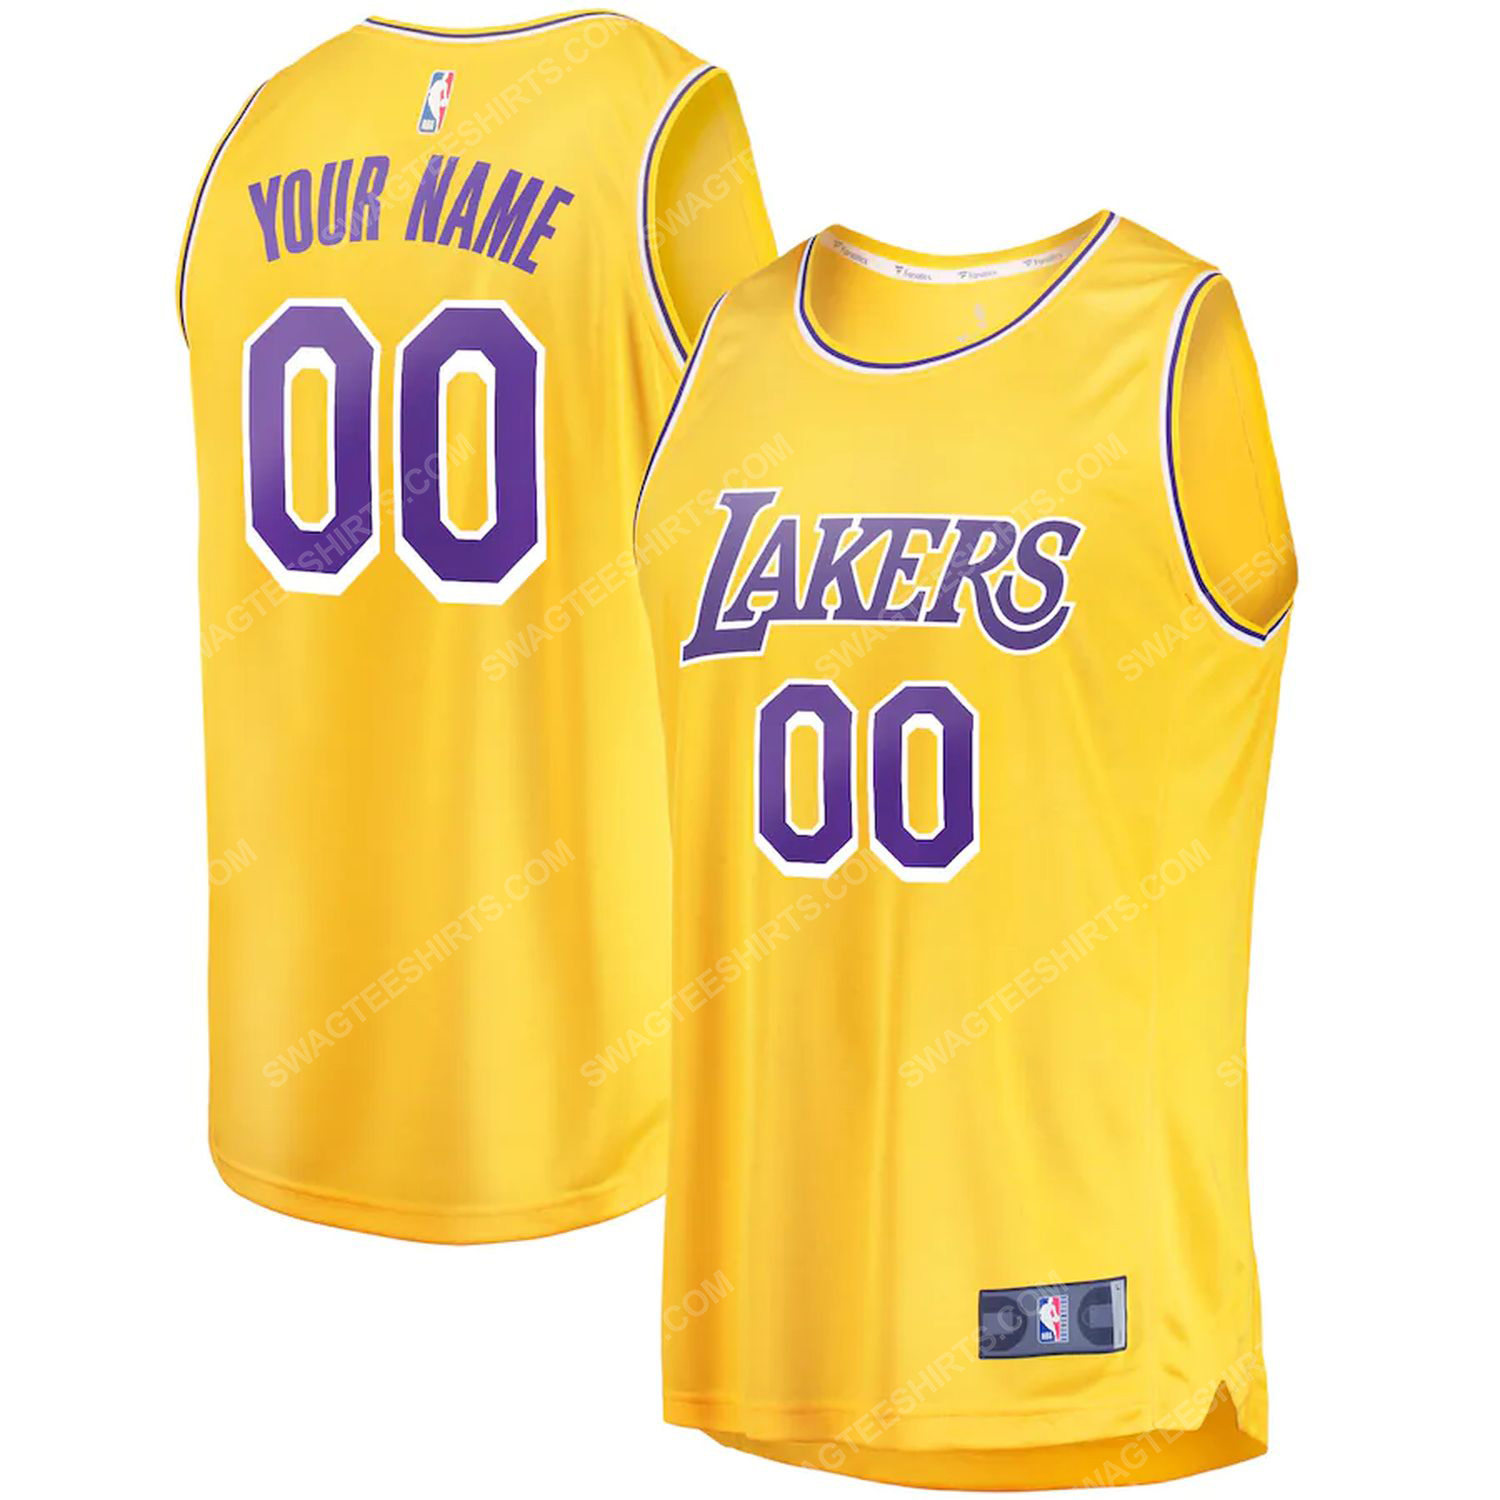 Custom nba los angeles lakers team basketball jersey-gold-icon edition - Copy (3)